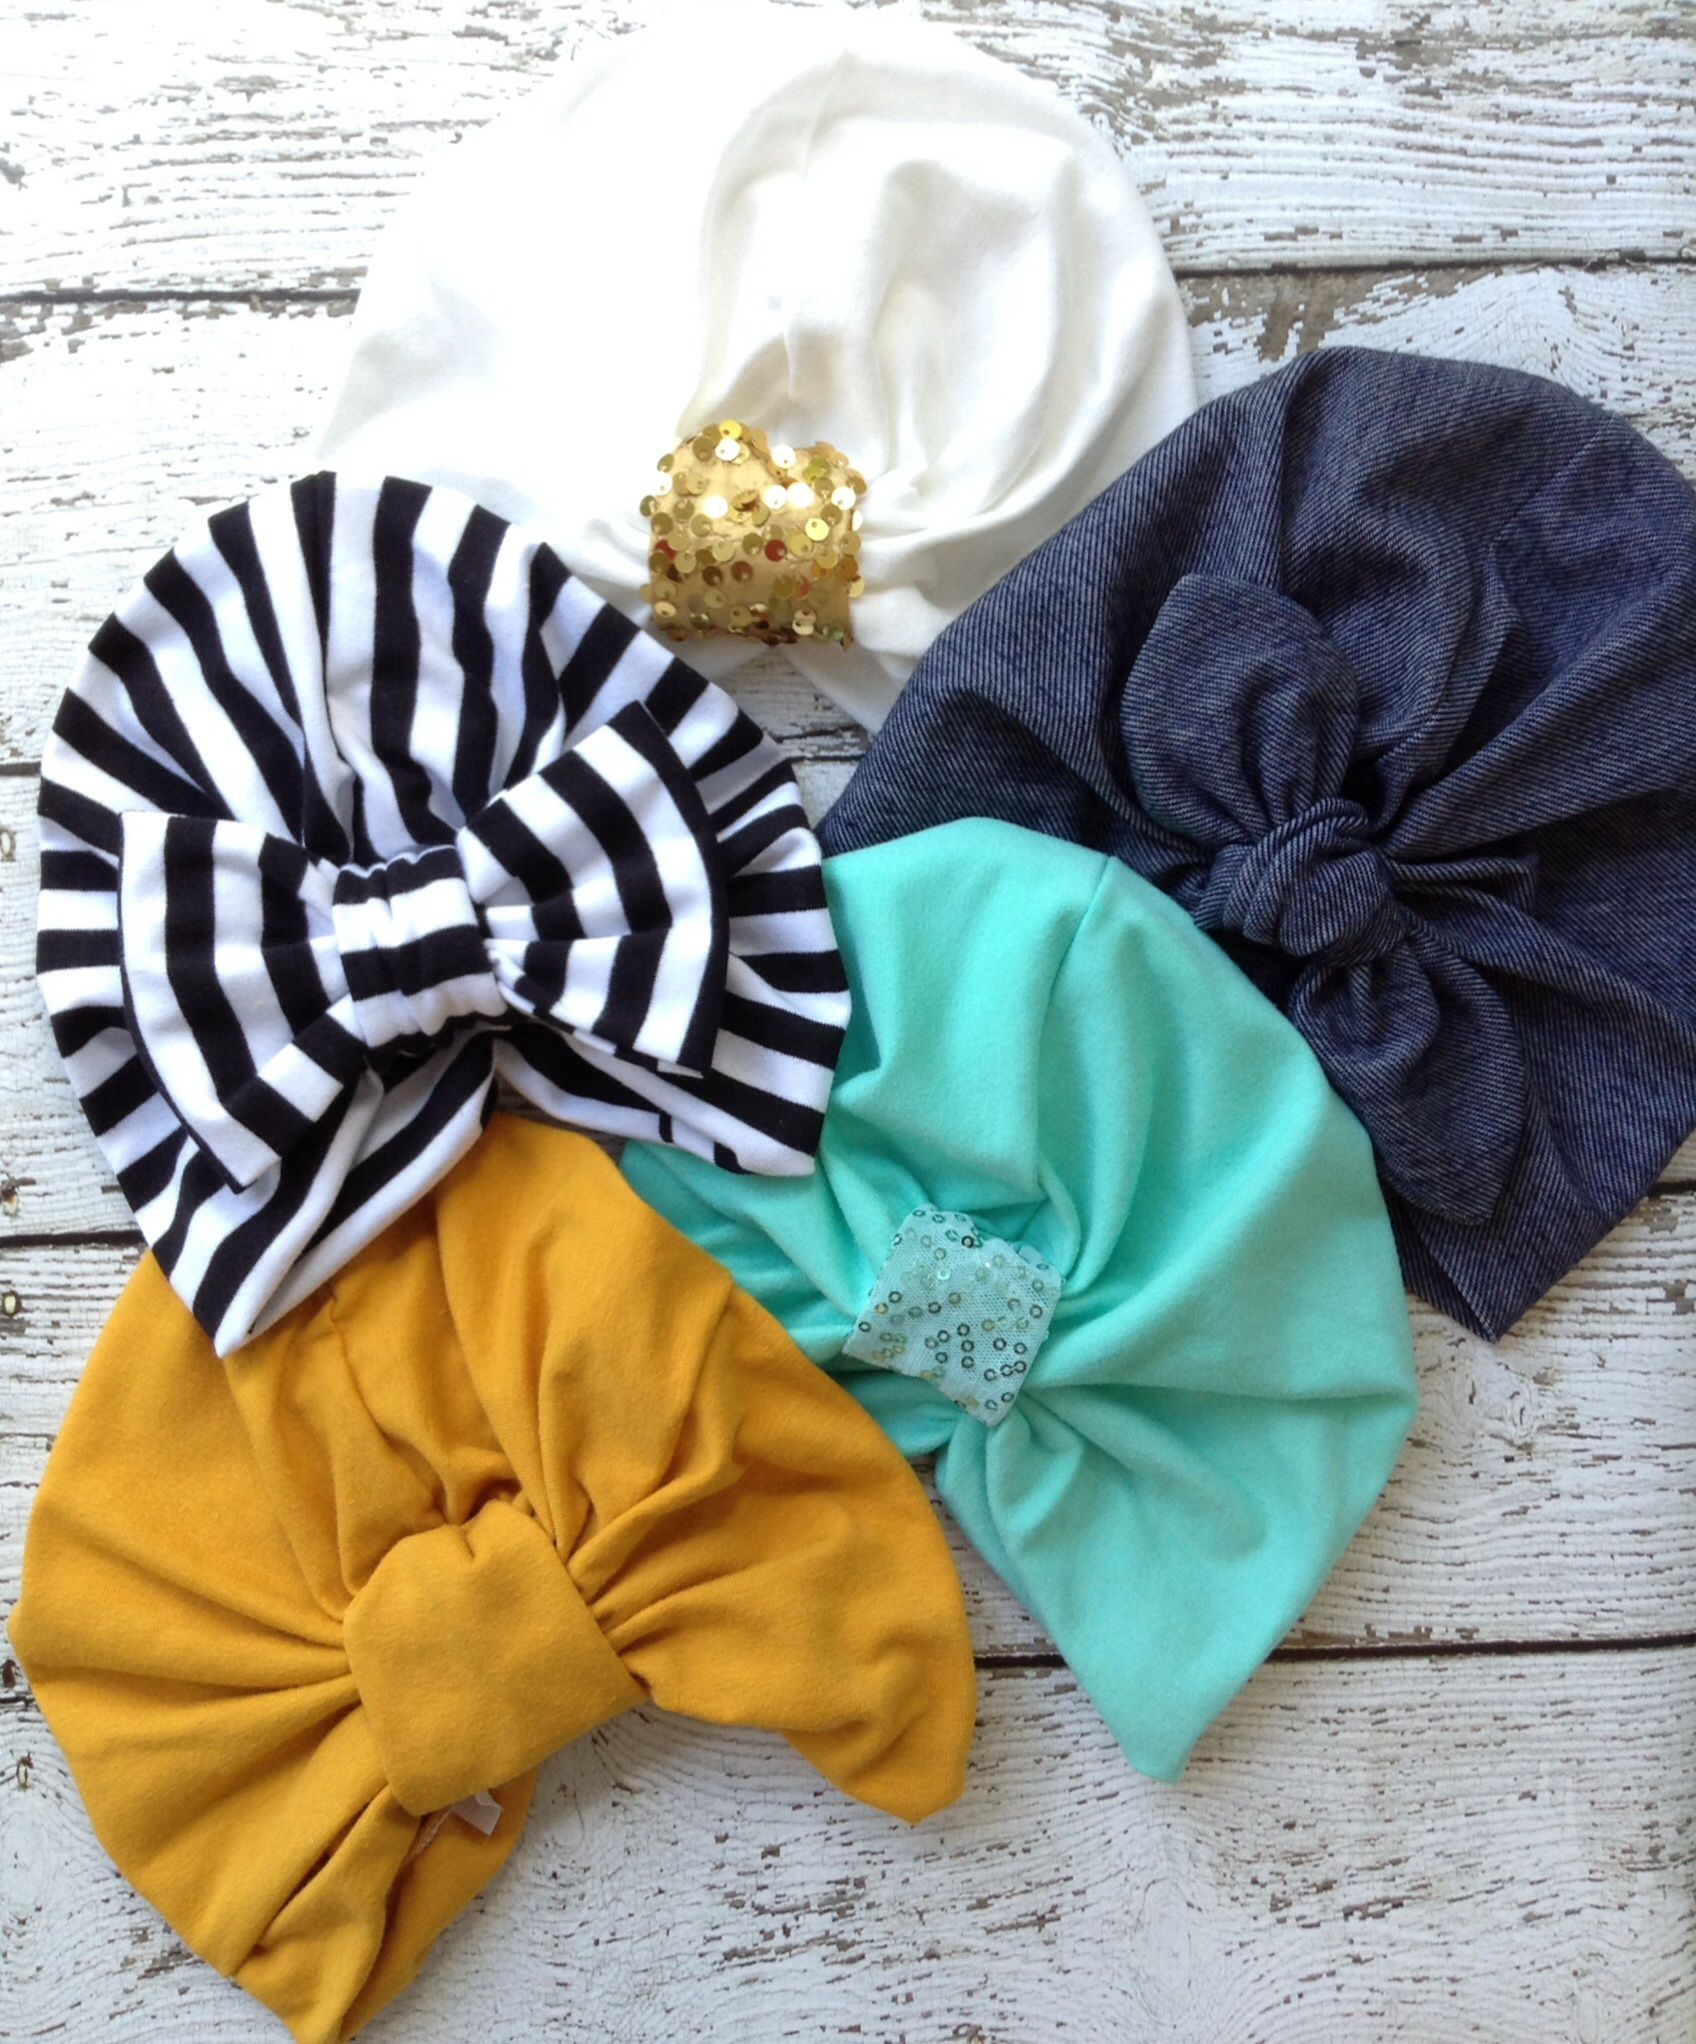 No more beanies! These turban hats are trendy and add a fashionable boho look . Completely handmade with a soft cotton blend knit